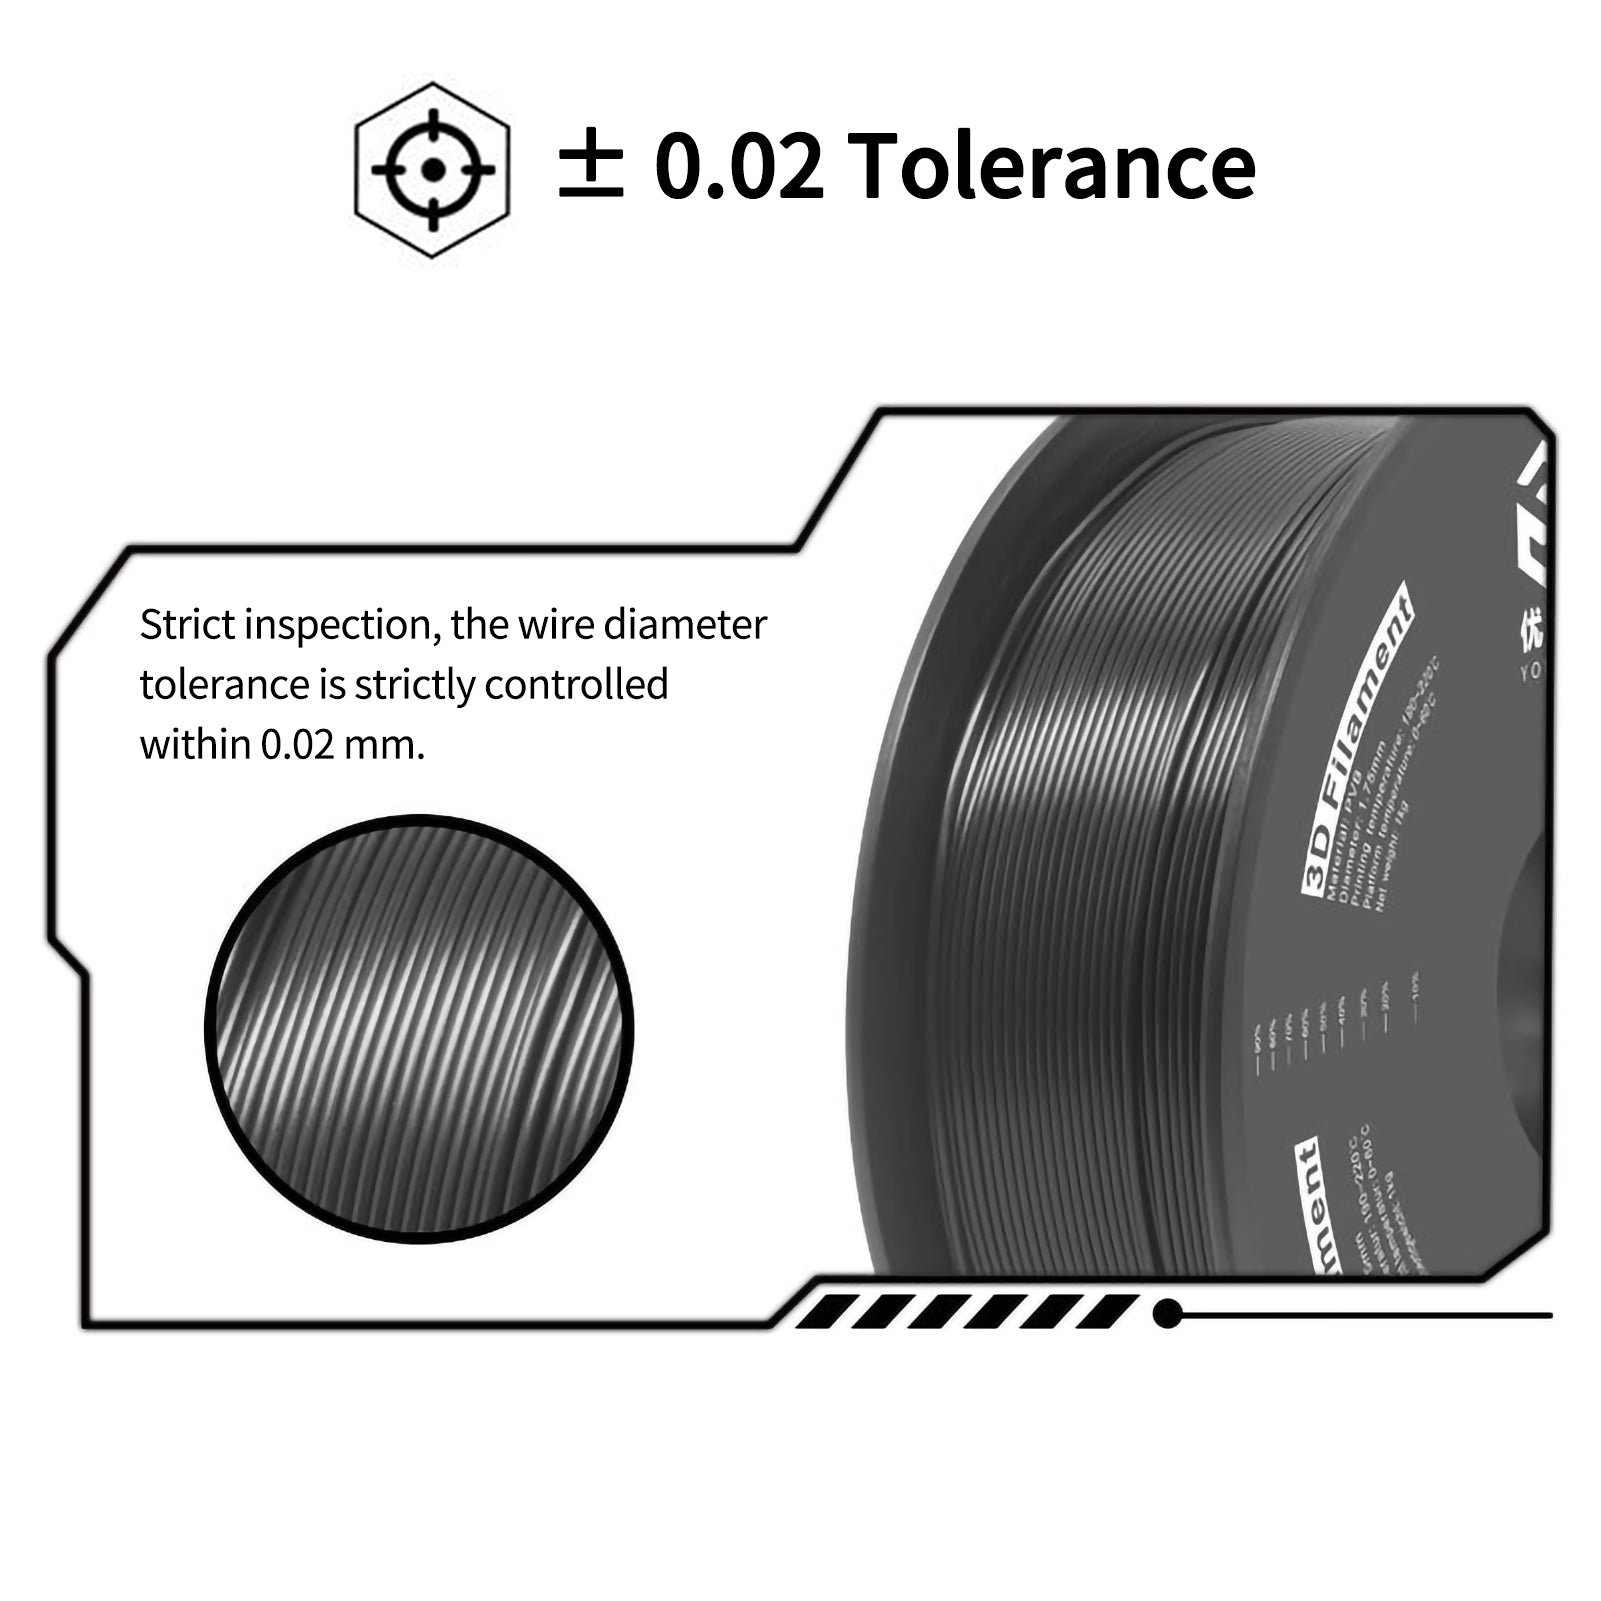 1kg Spool Creality PLA+ Filament 1.75mm diameter printing consumables for Creality 3D Printer, Suitable for most 3D printers , black